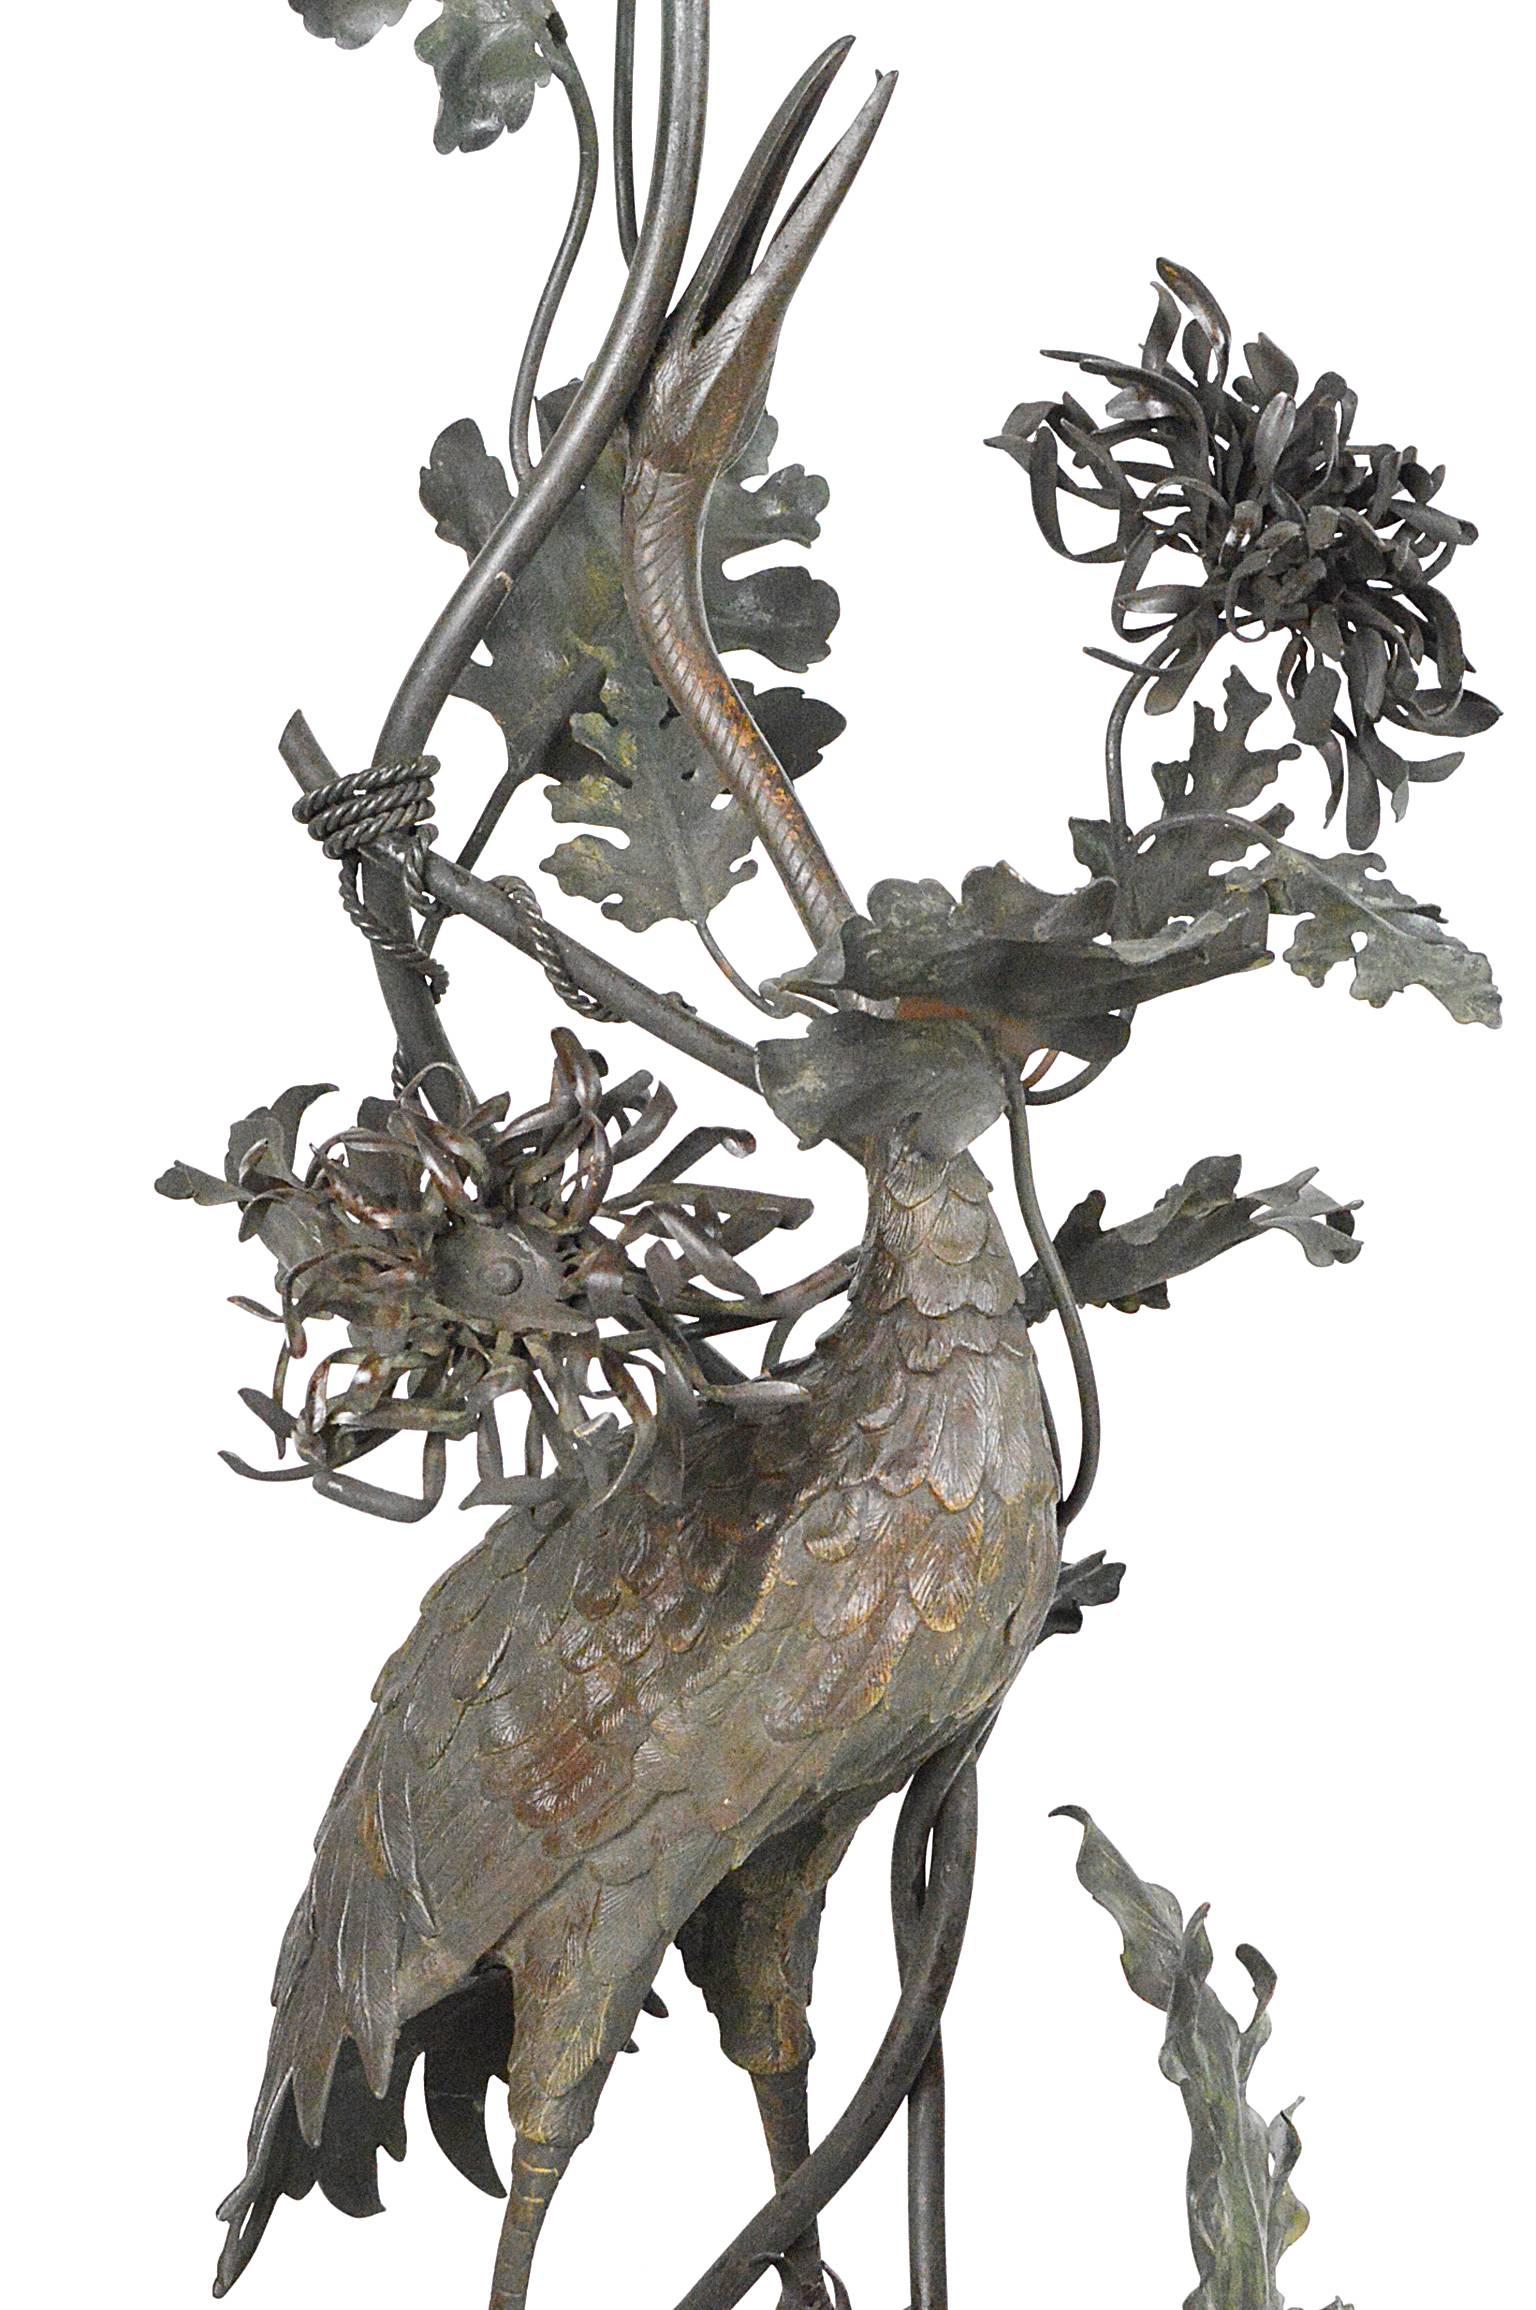 Austrian bronze floor lamp with detailed egret surrounded by large leaves and foliage.
Provenance: From an Iris Apfel decorated estate.
Measures: 61